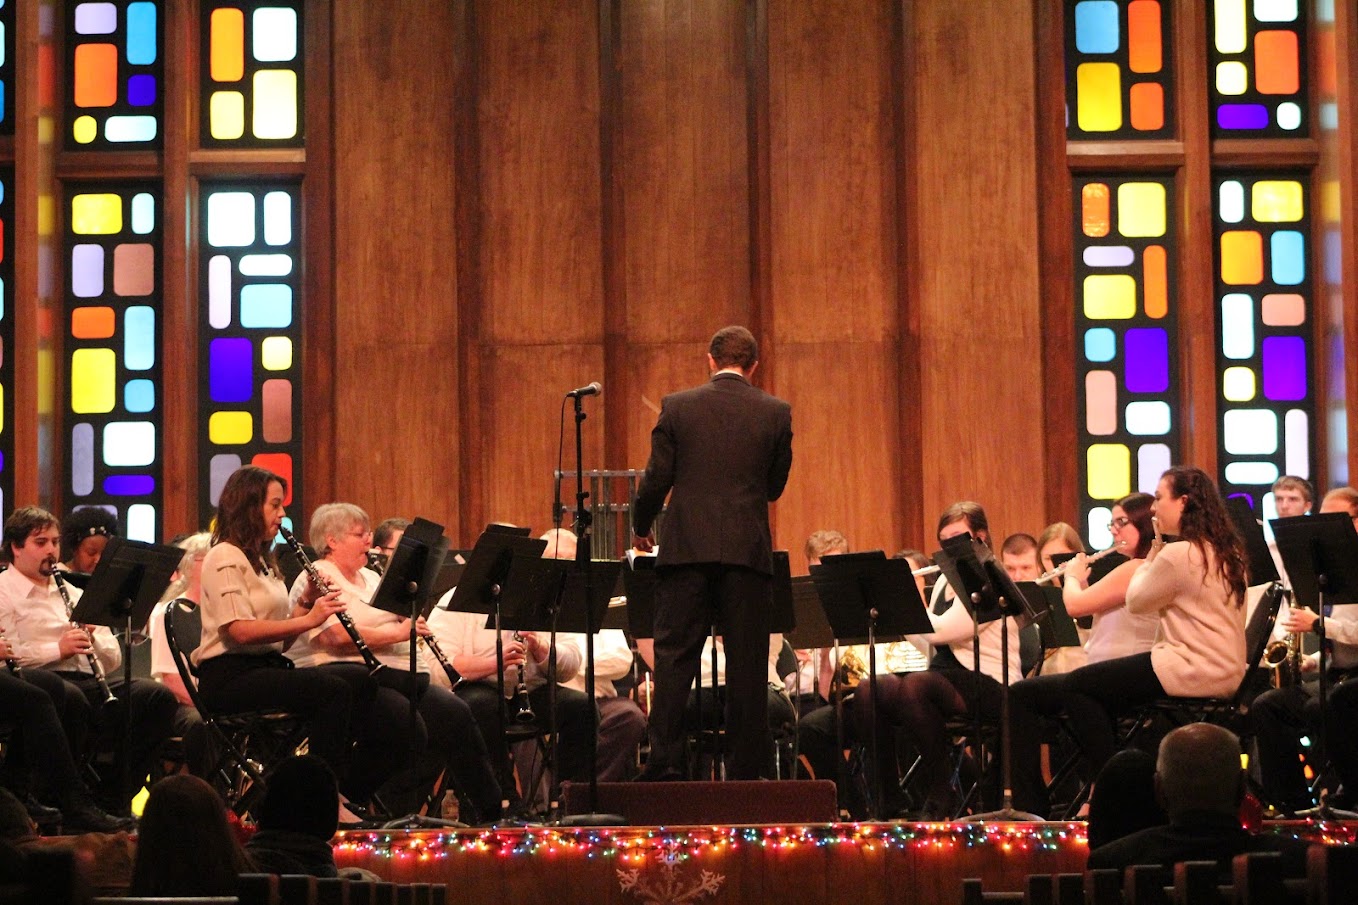 Winter concert being conducted